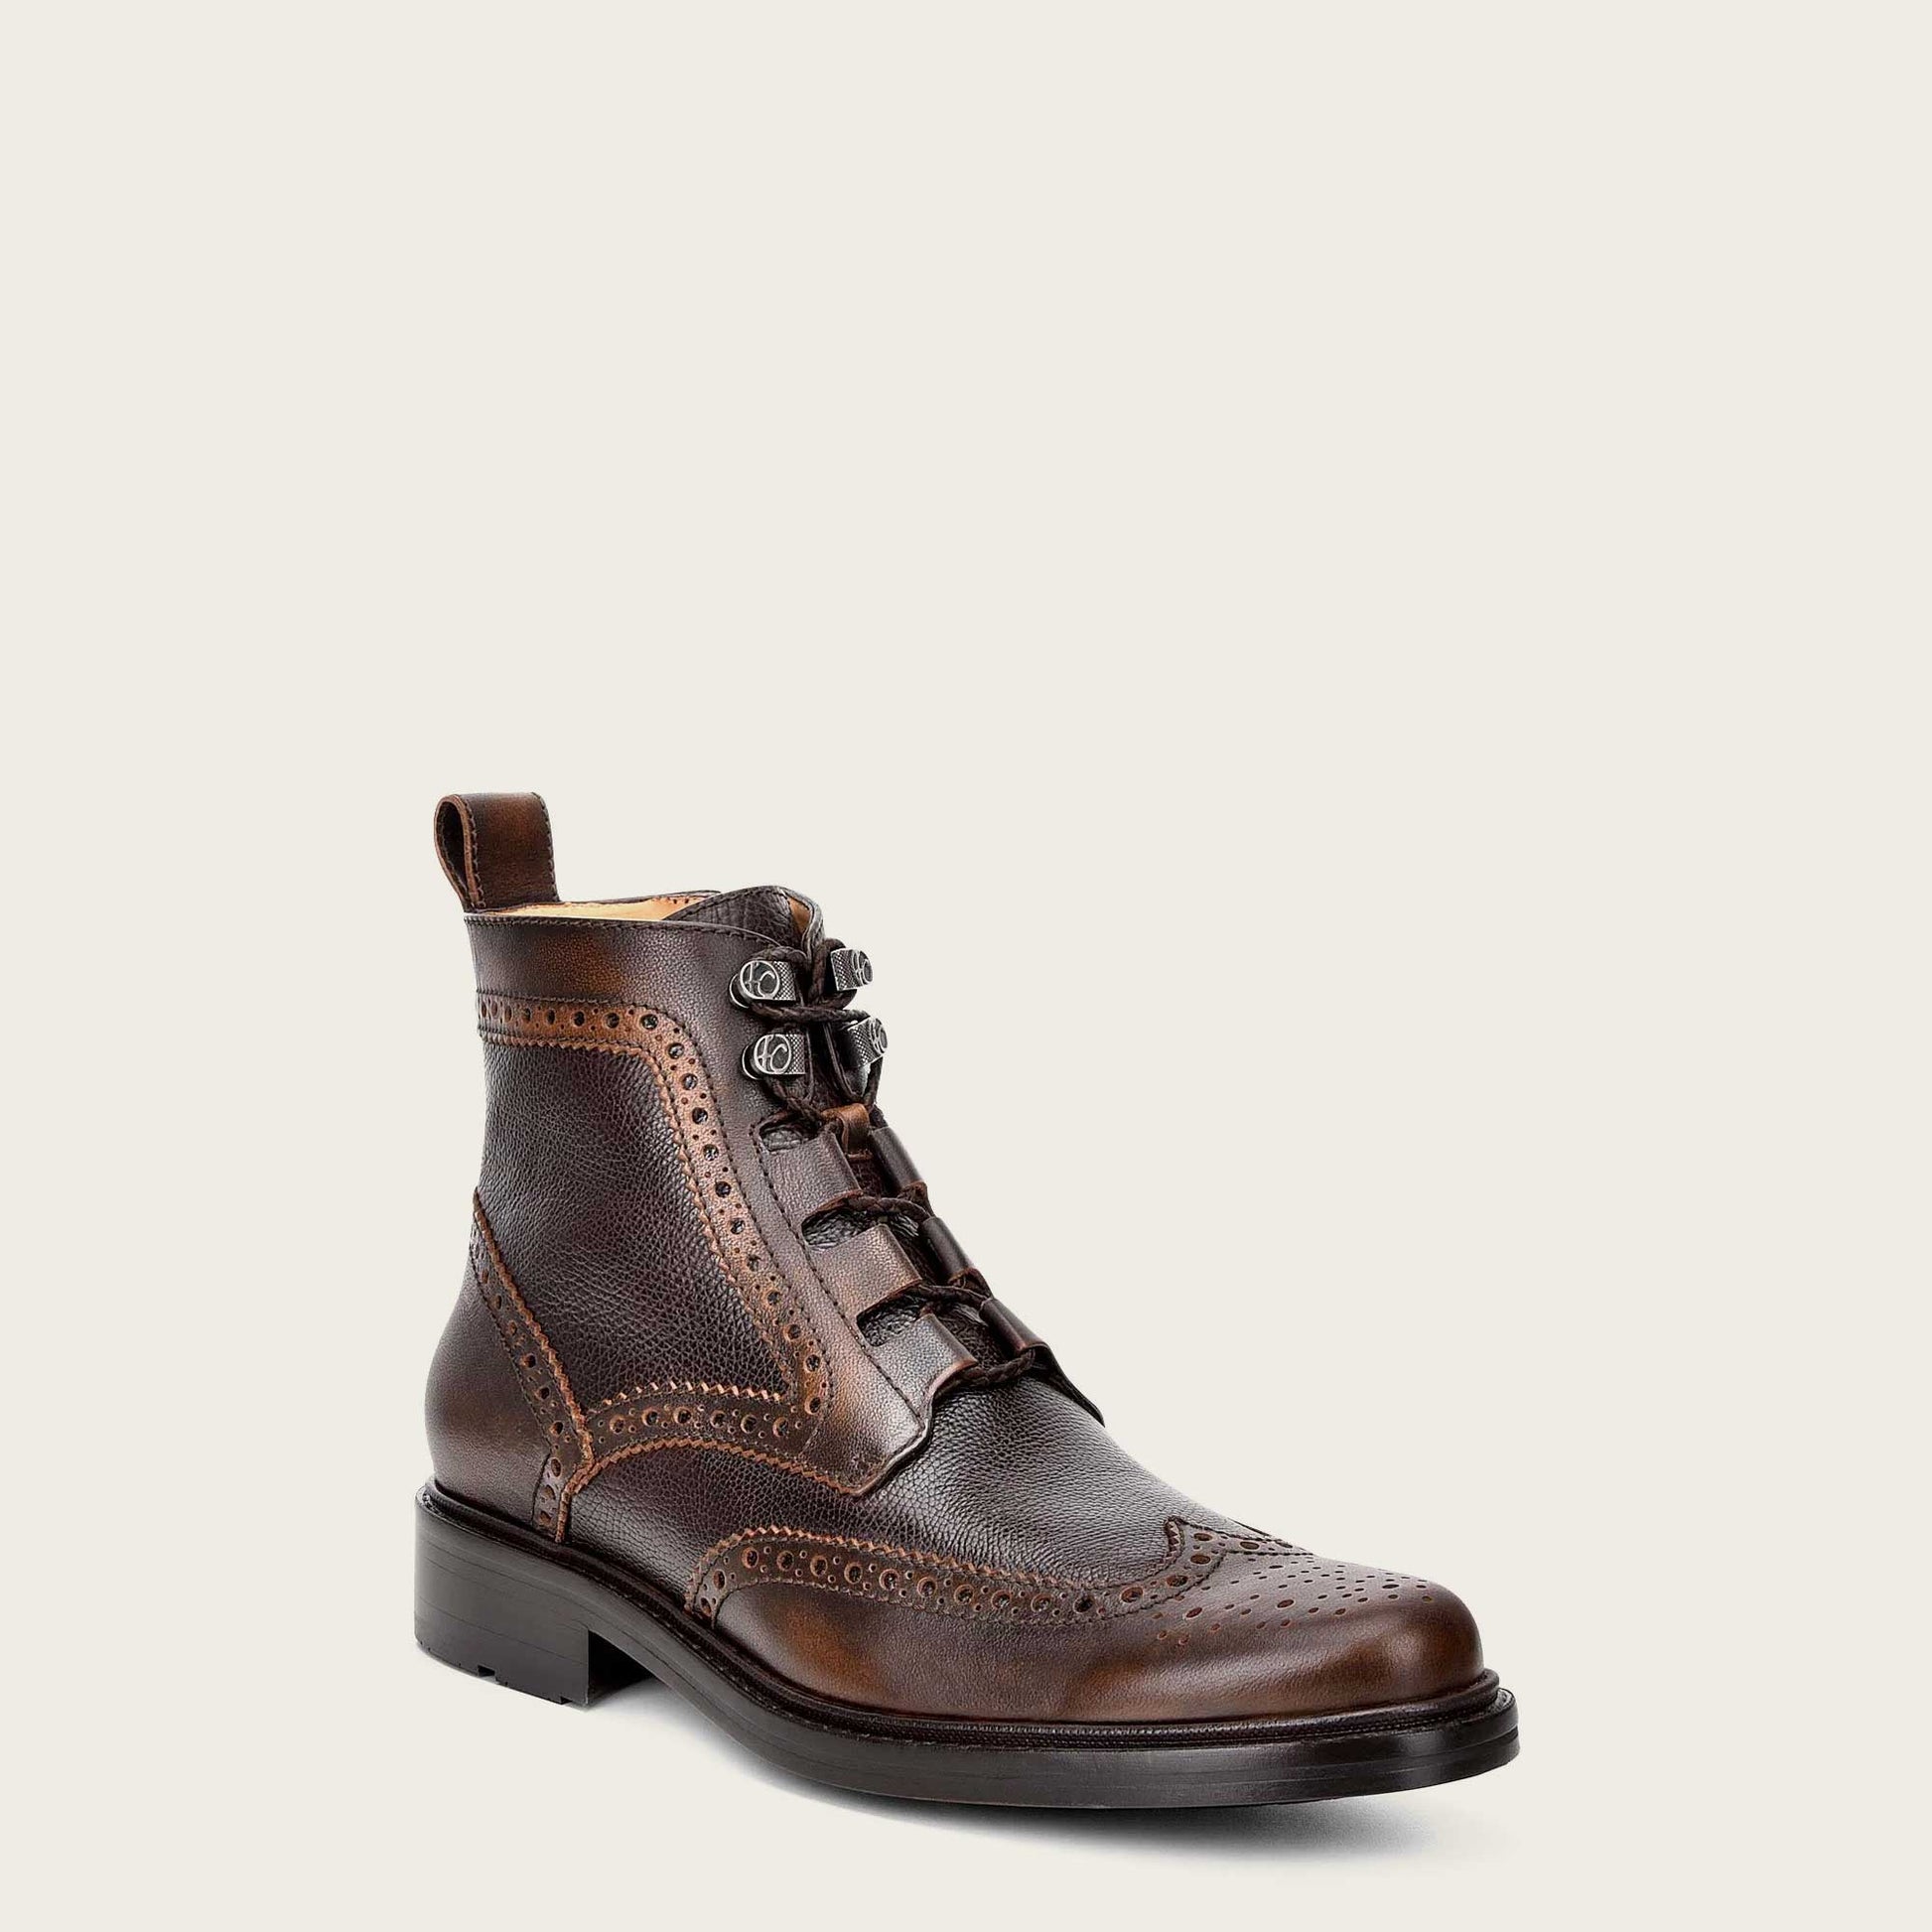 Add a touch of artistry to your wardrobe with this men's hand-painted brown bi-tone leather boot. The intricate brush strokes and color gradations create a one-of-a-kind masterpiece for your feet.